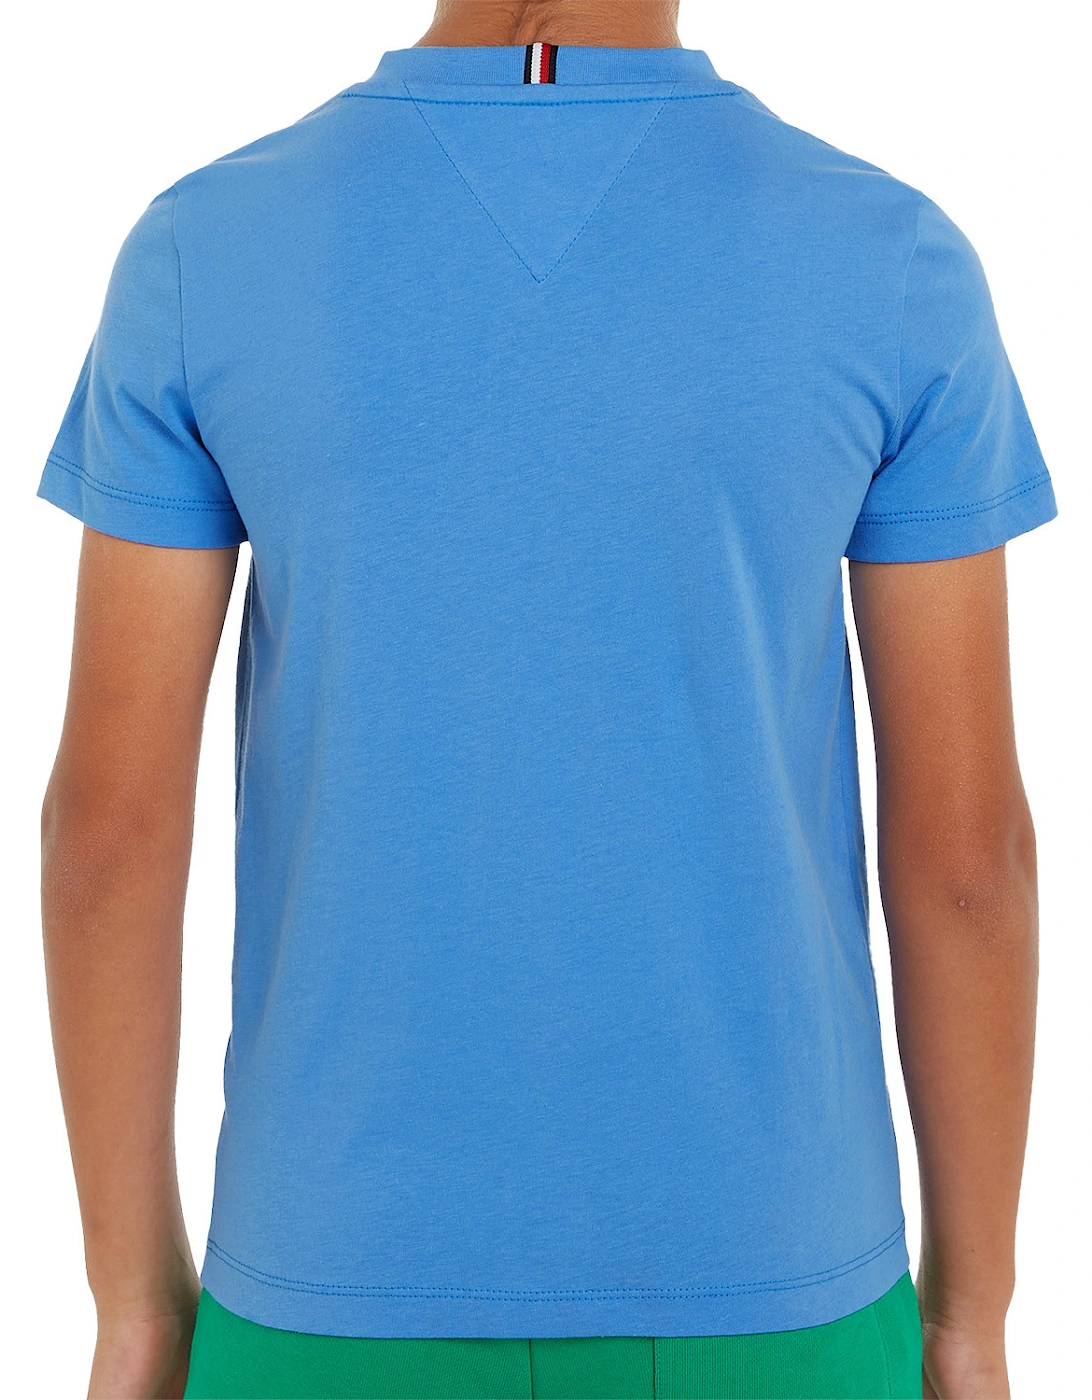 Youths Essential T-Shirt (Blue)